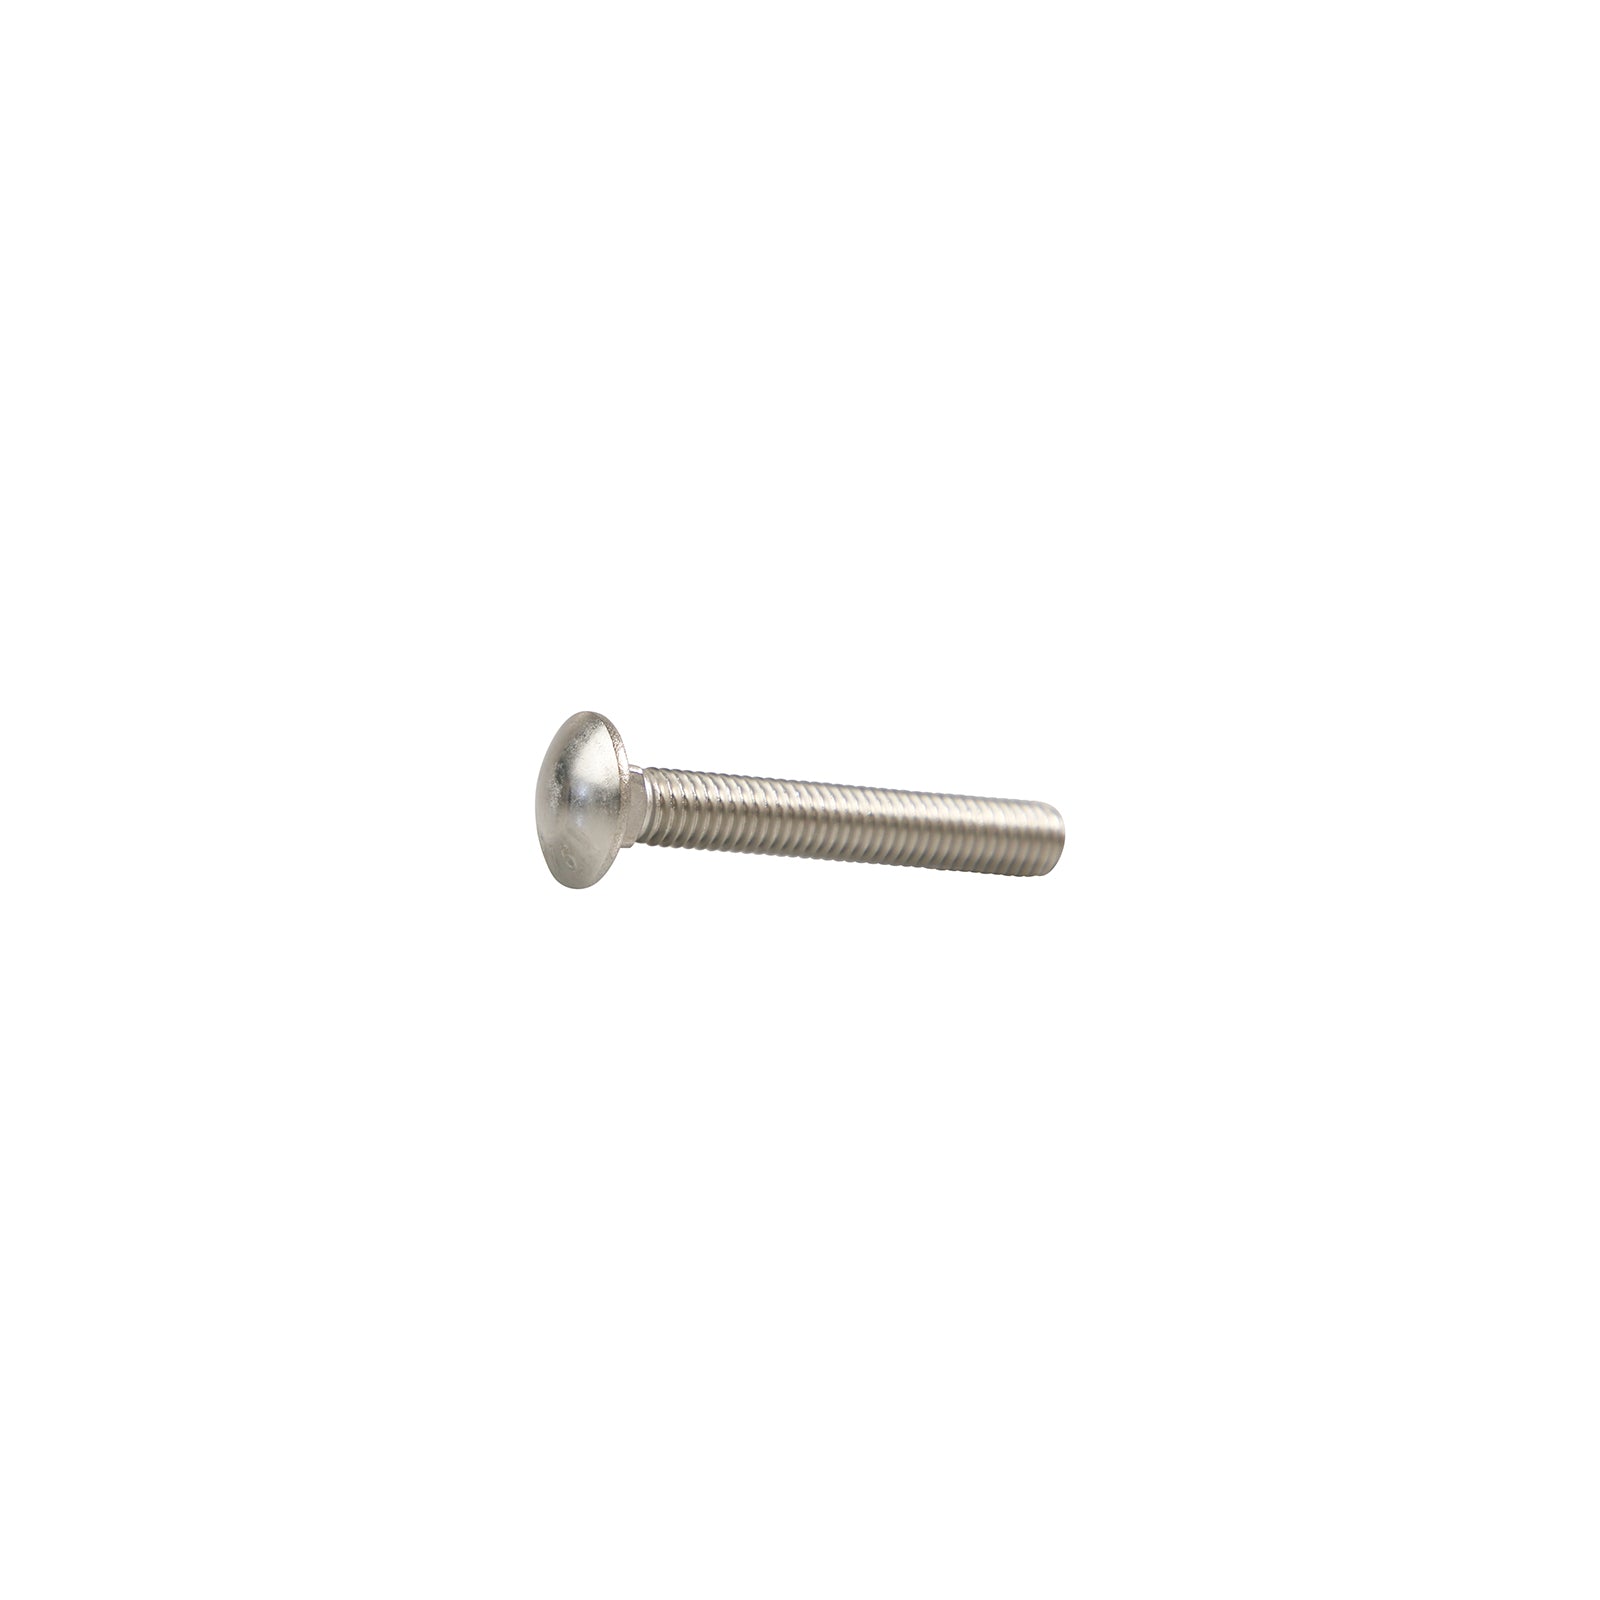 3/8"-16 x 2-1/2" Conquest Carriage Bolt - 316 Stainless Steel